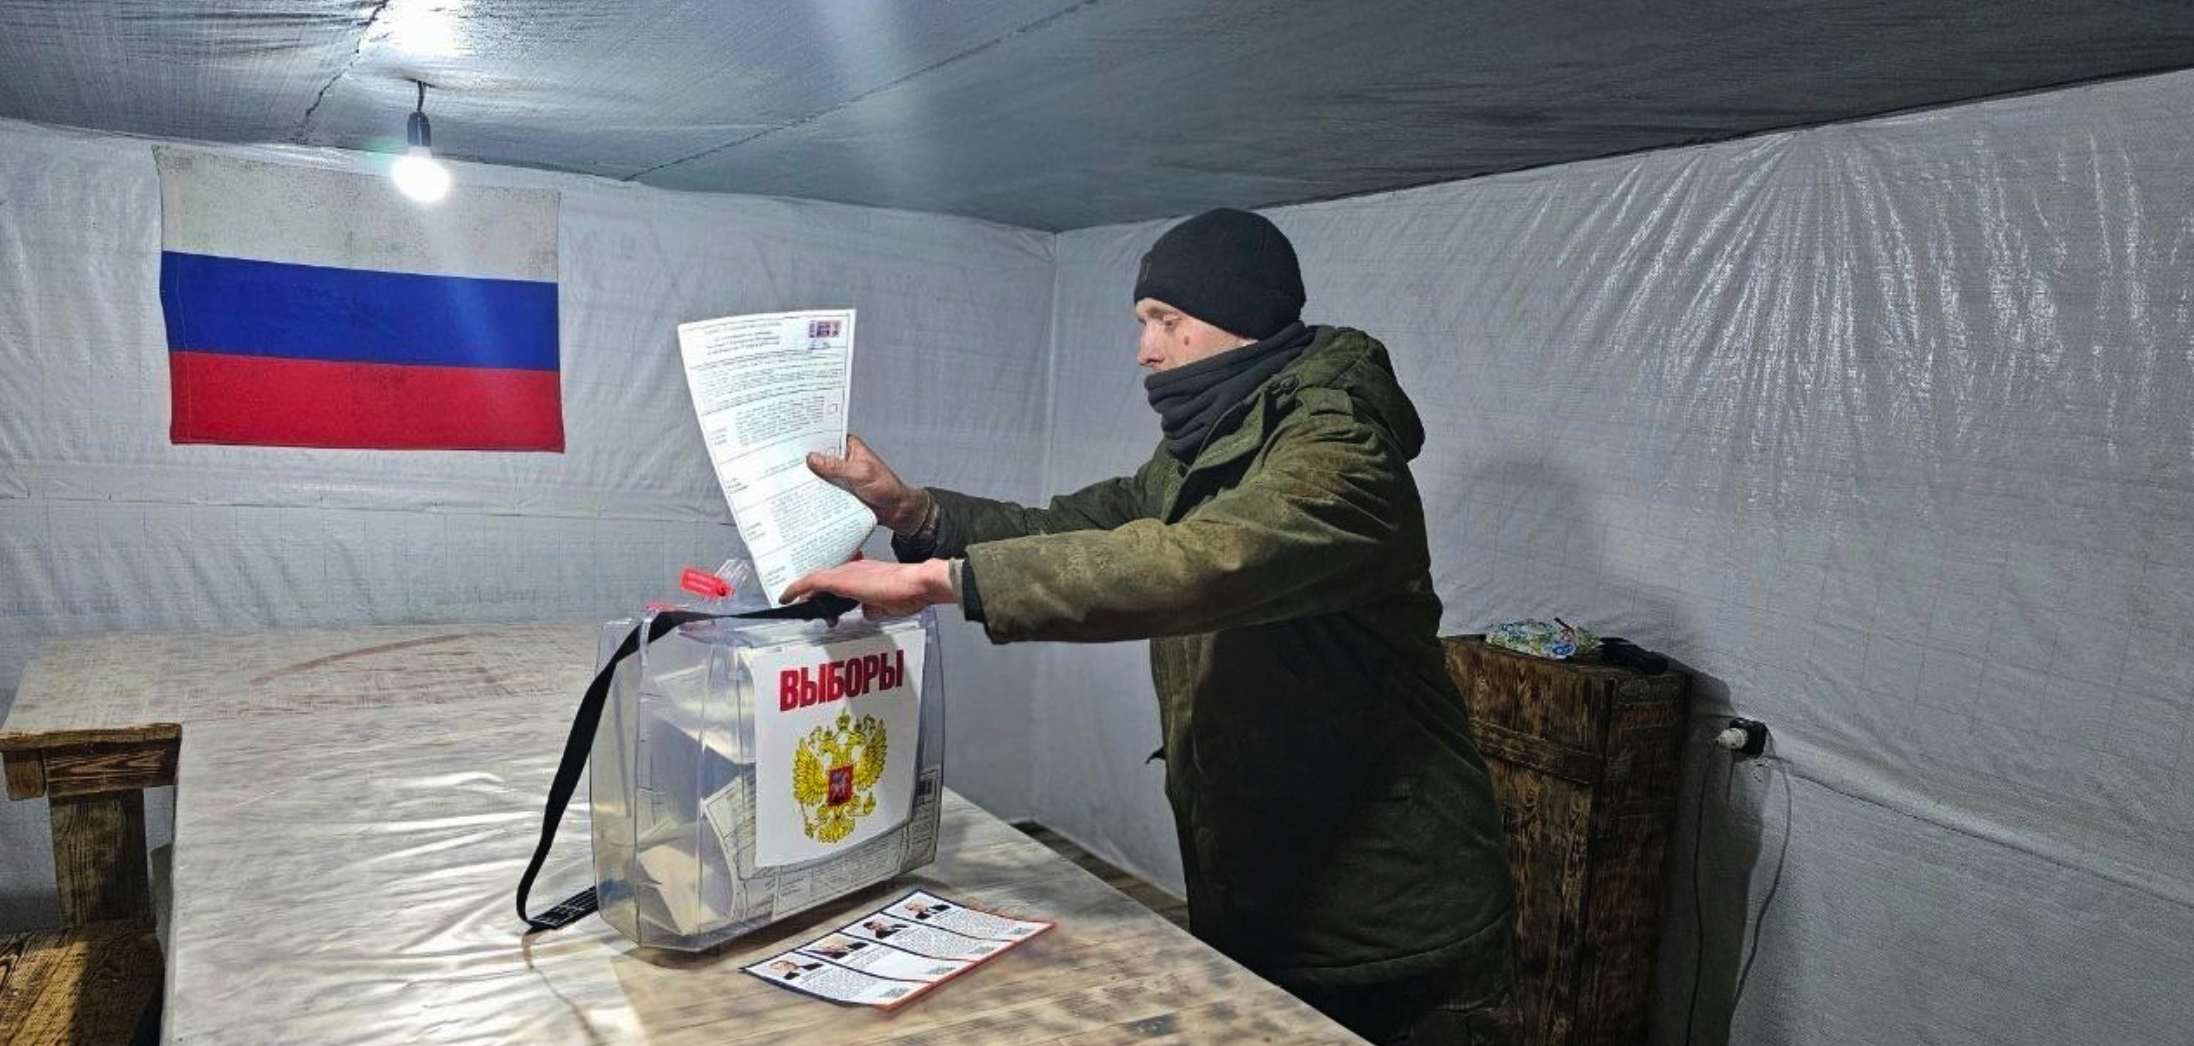 Russia prepares sham elections in occupied territories using NKVD-like units